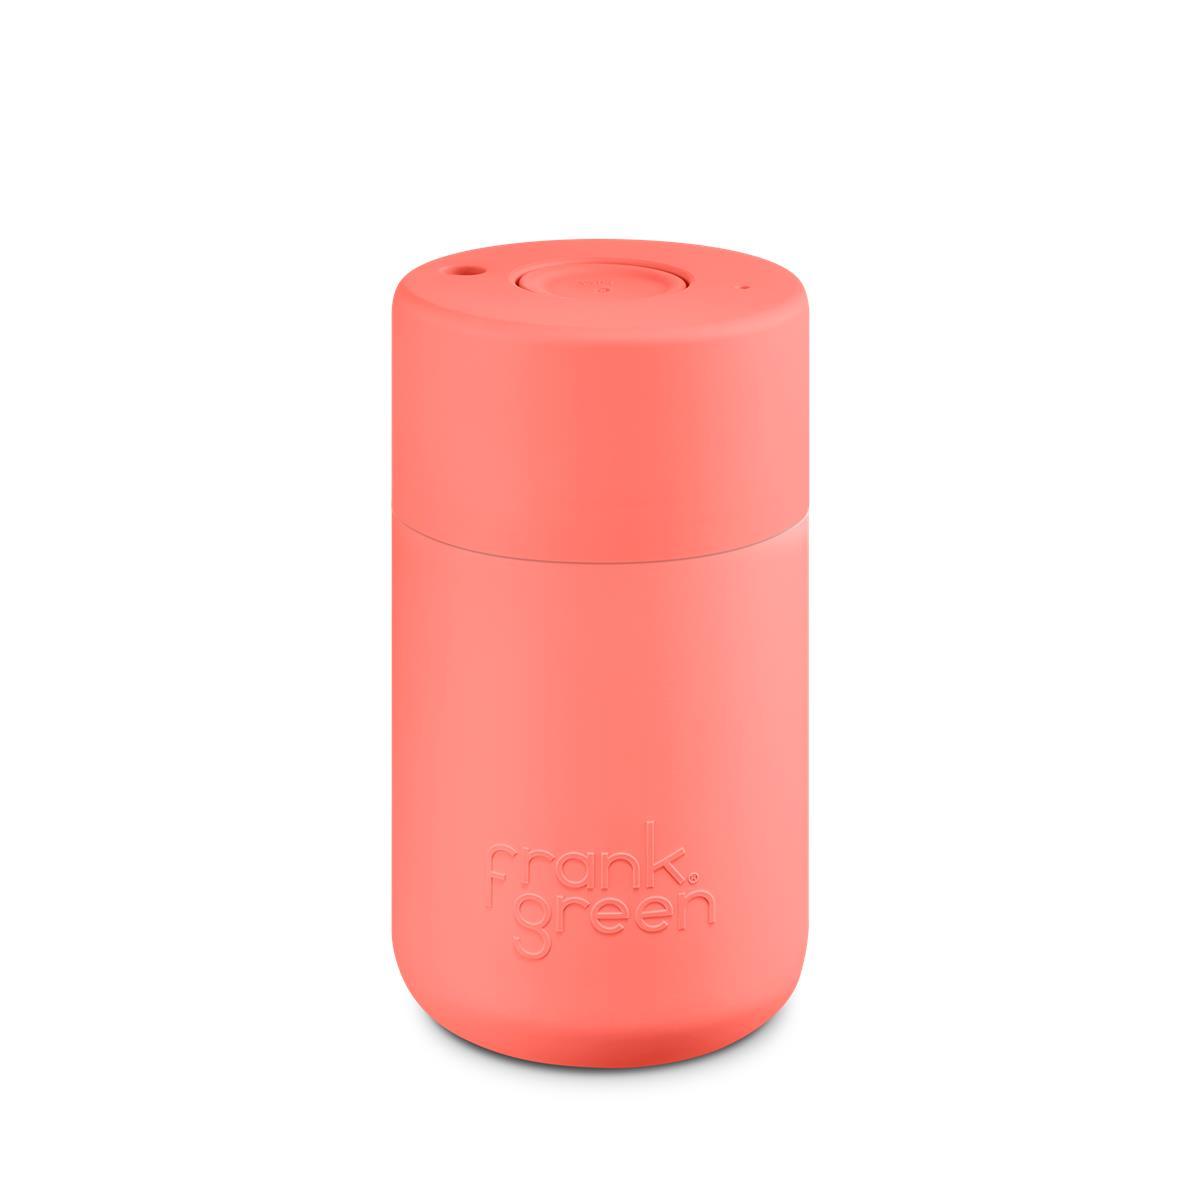 Frank Green Reusable Cup Review